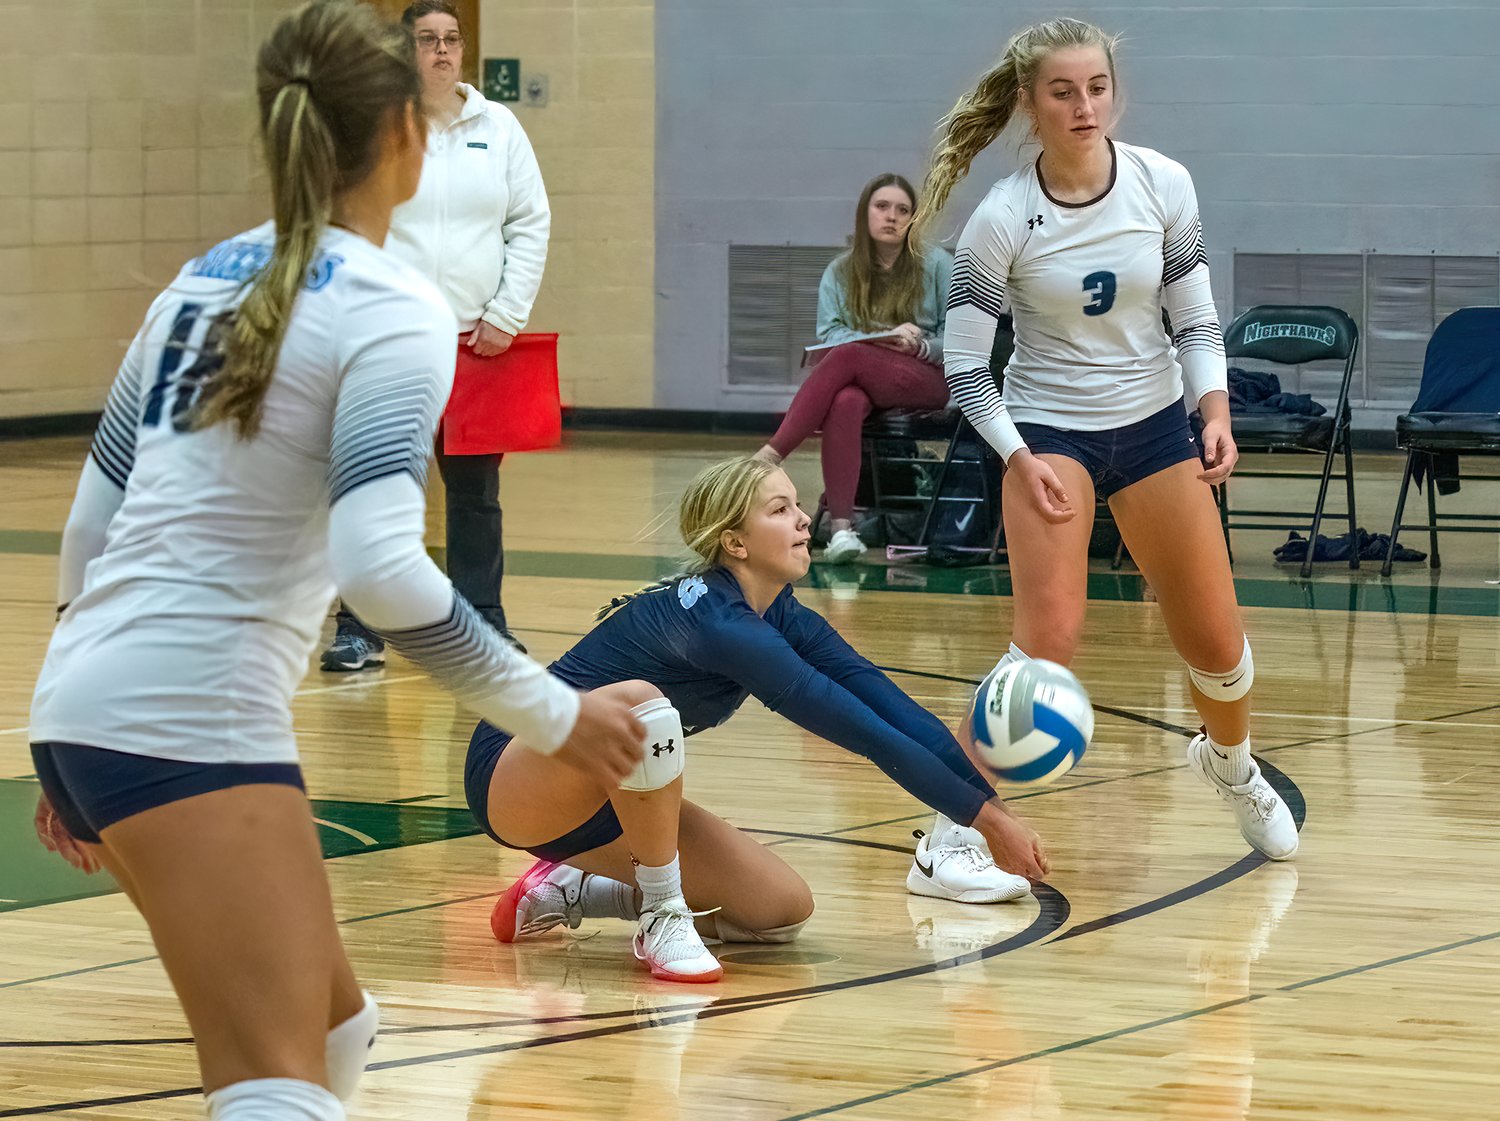 he Grizzlies’ Tori Olson goes low for a dig during last Thursday’s match-up with NER.